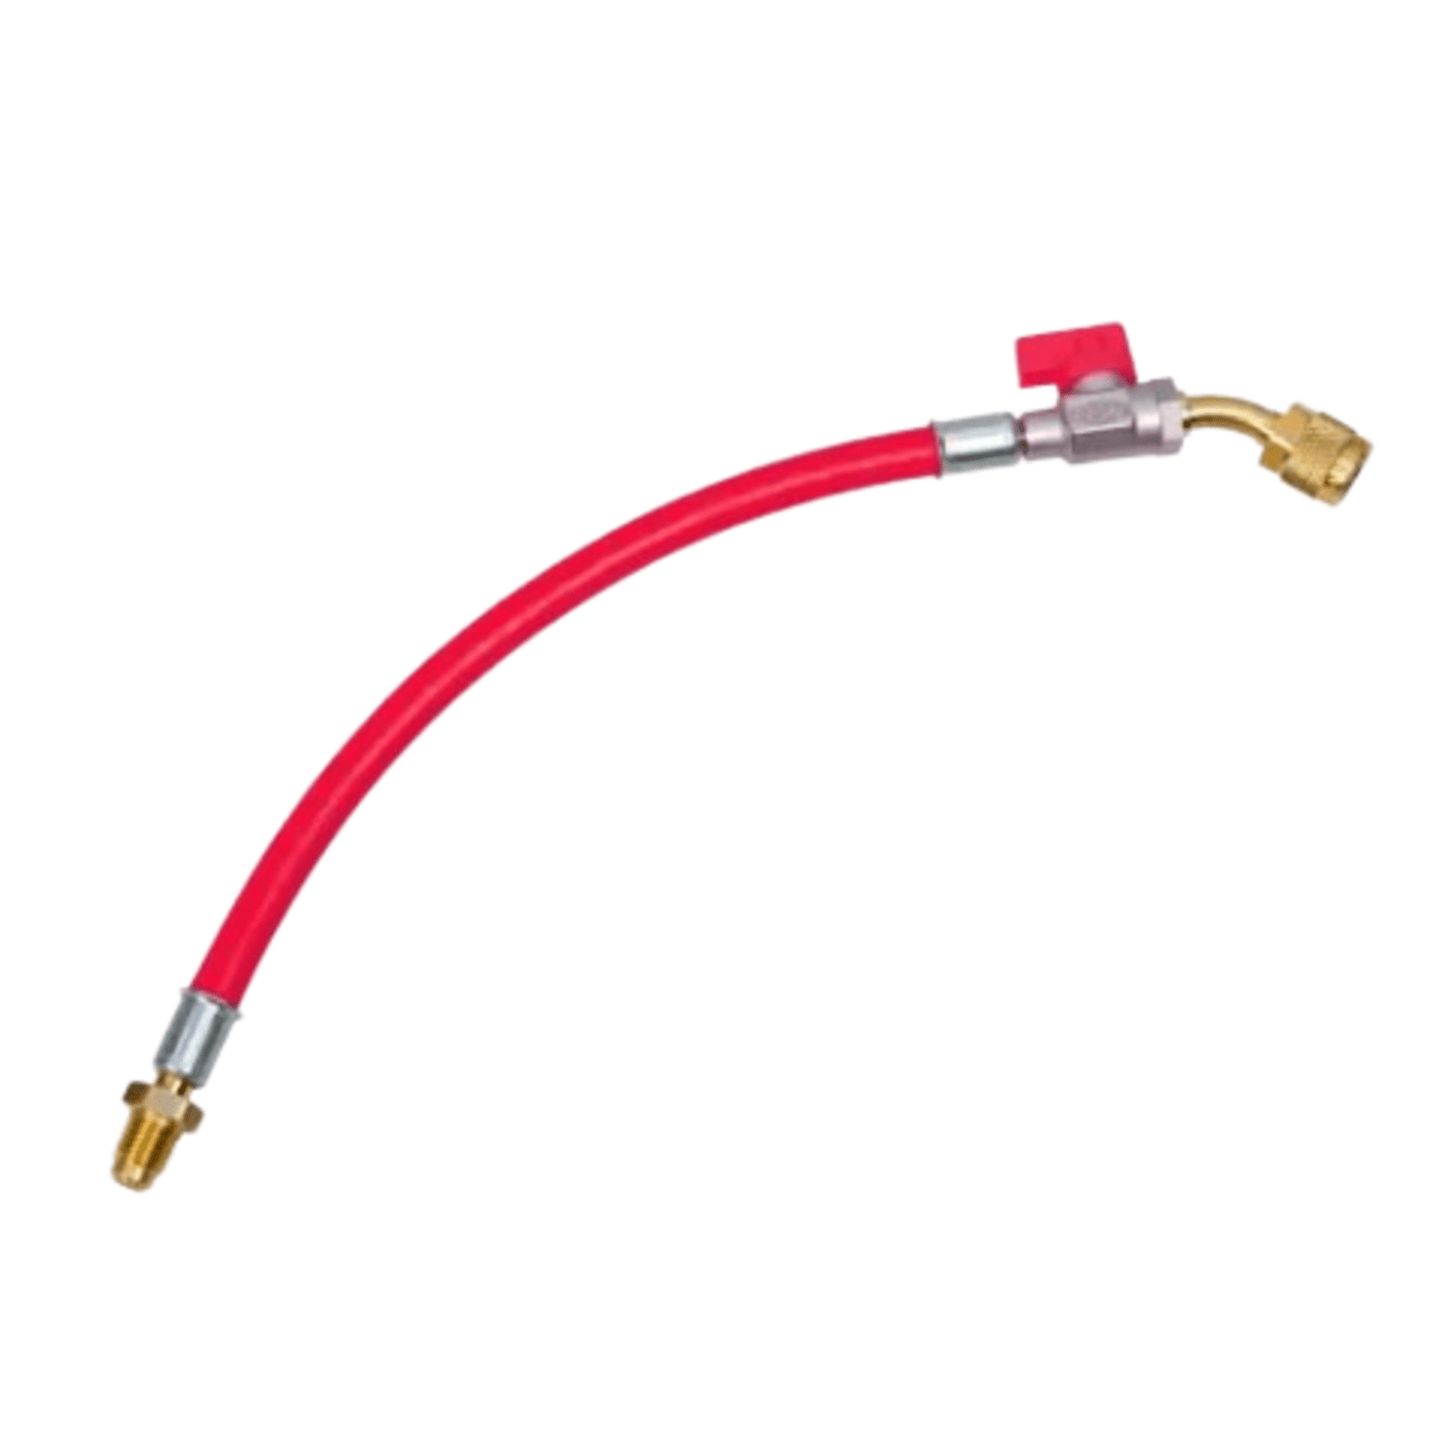 Refco 4682047, CA-CL-9-R-M, Connecting hose, red, with ball valve, 1/4"SAE, 9"